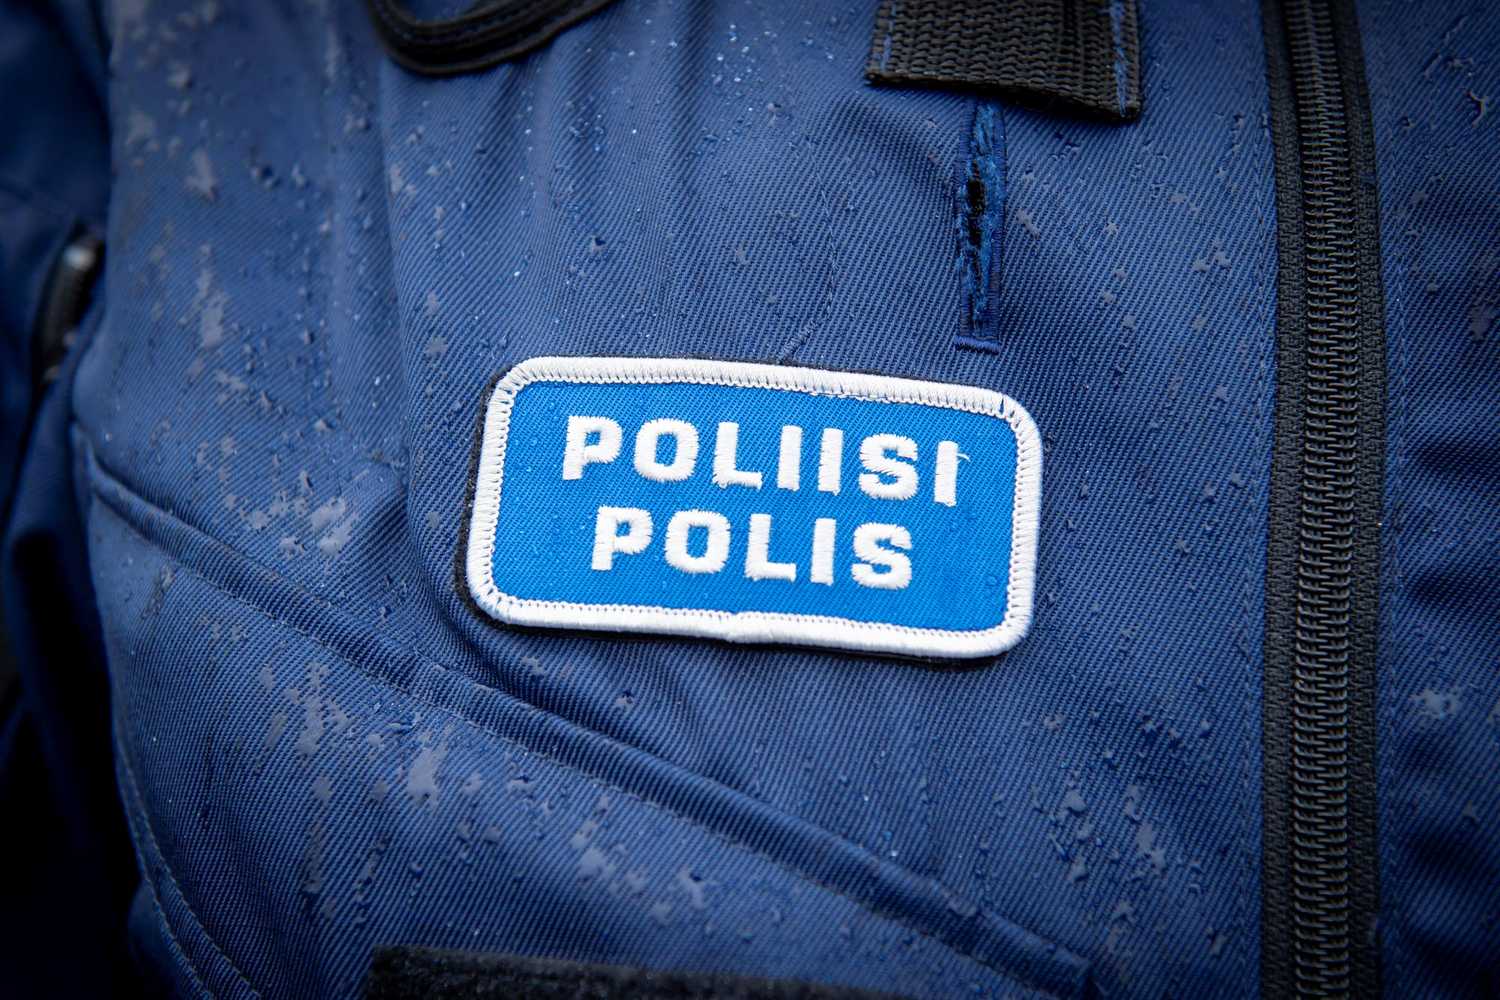 Police/Polis fabric badge on the chest of a rain-soaked vest.